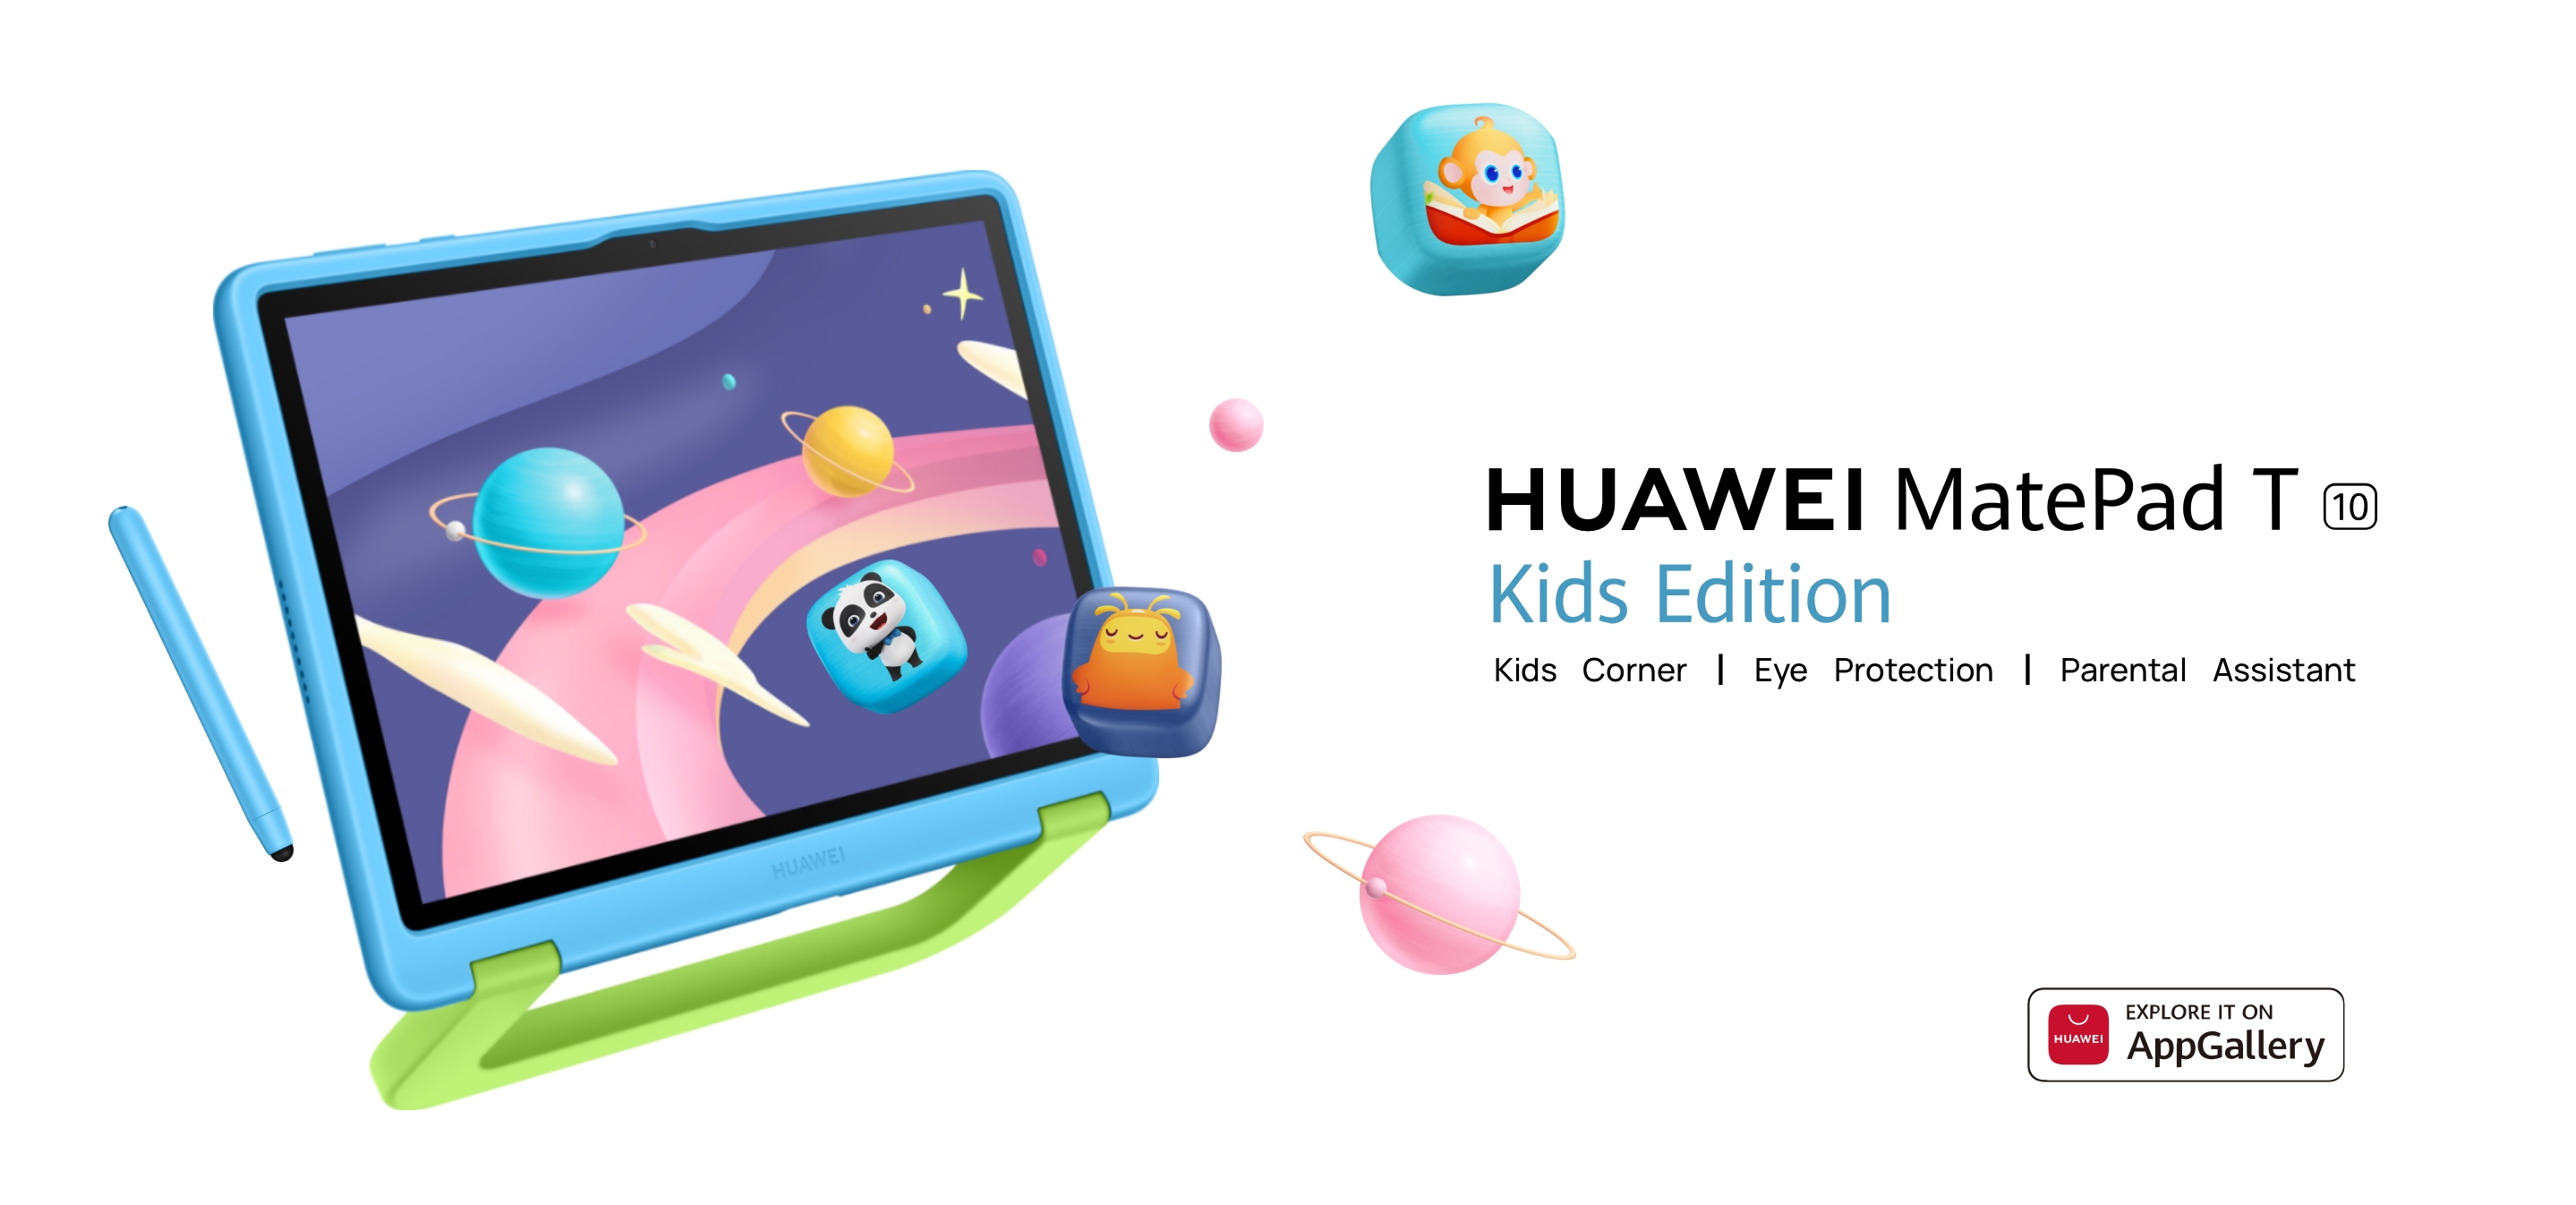 Huawei MatePad T10 Kids Edition: a tablet for children with a protective case made of food-grade rubber and a stylus for $200